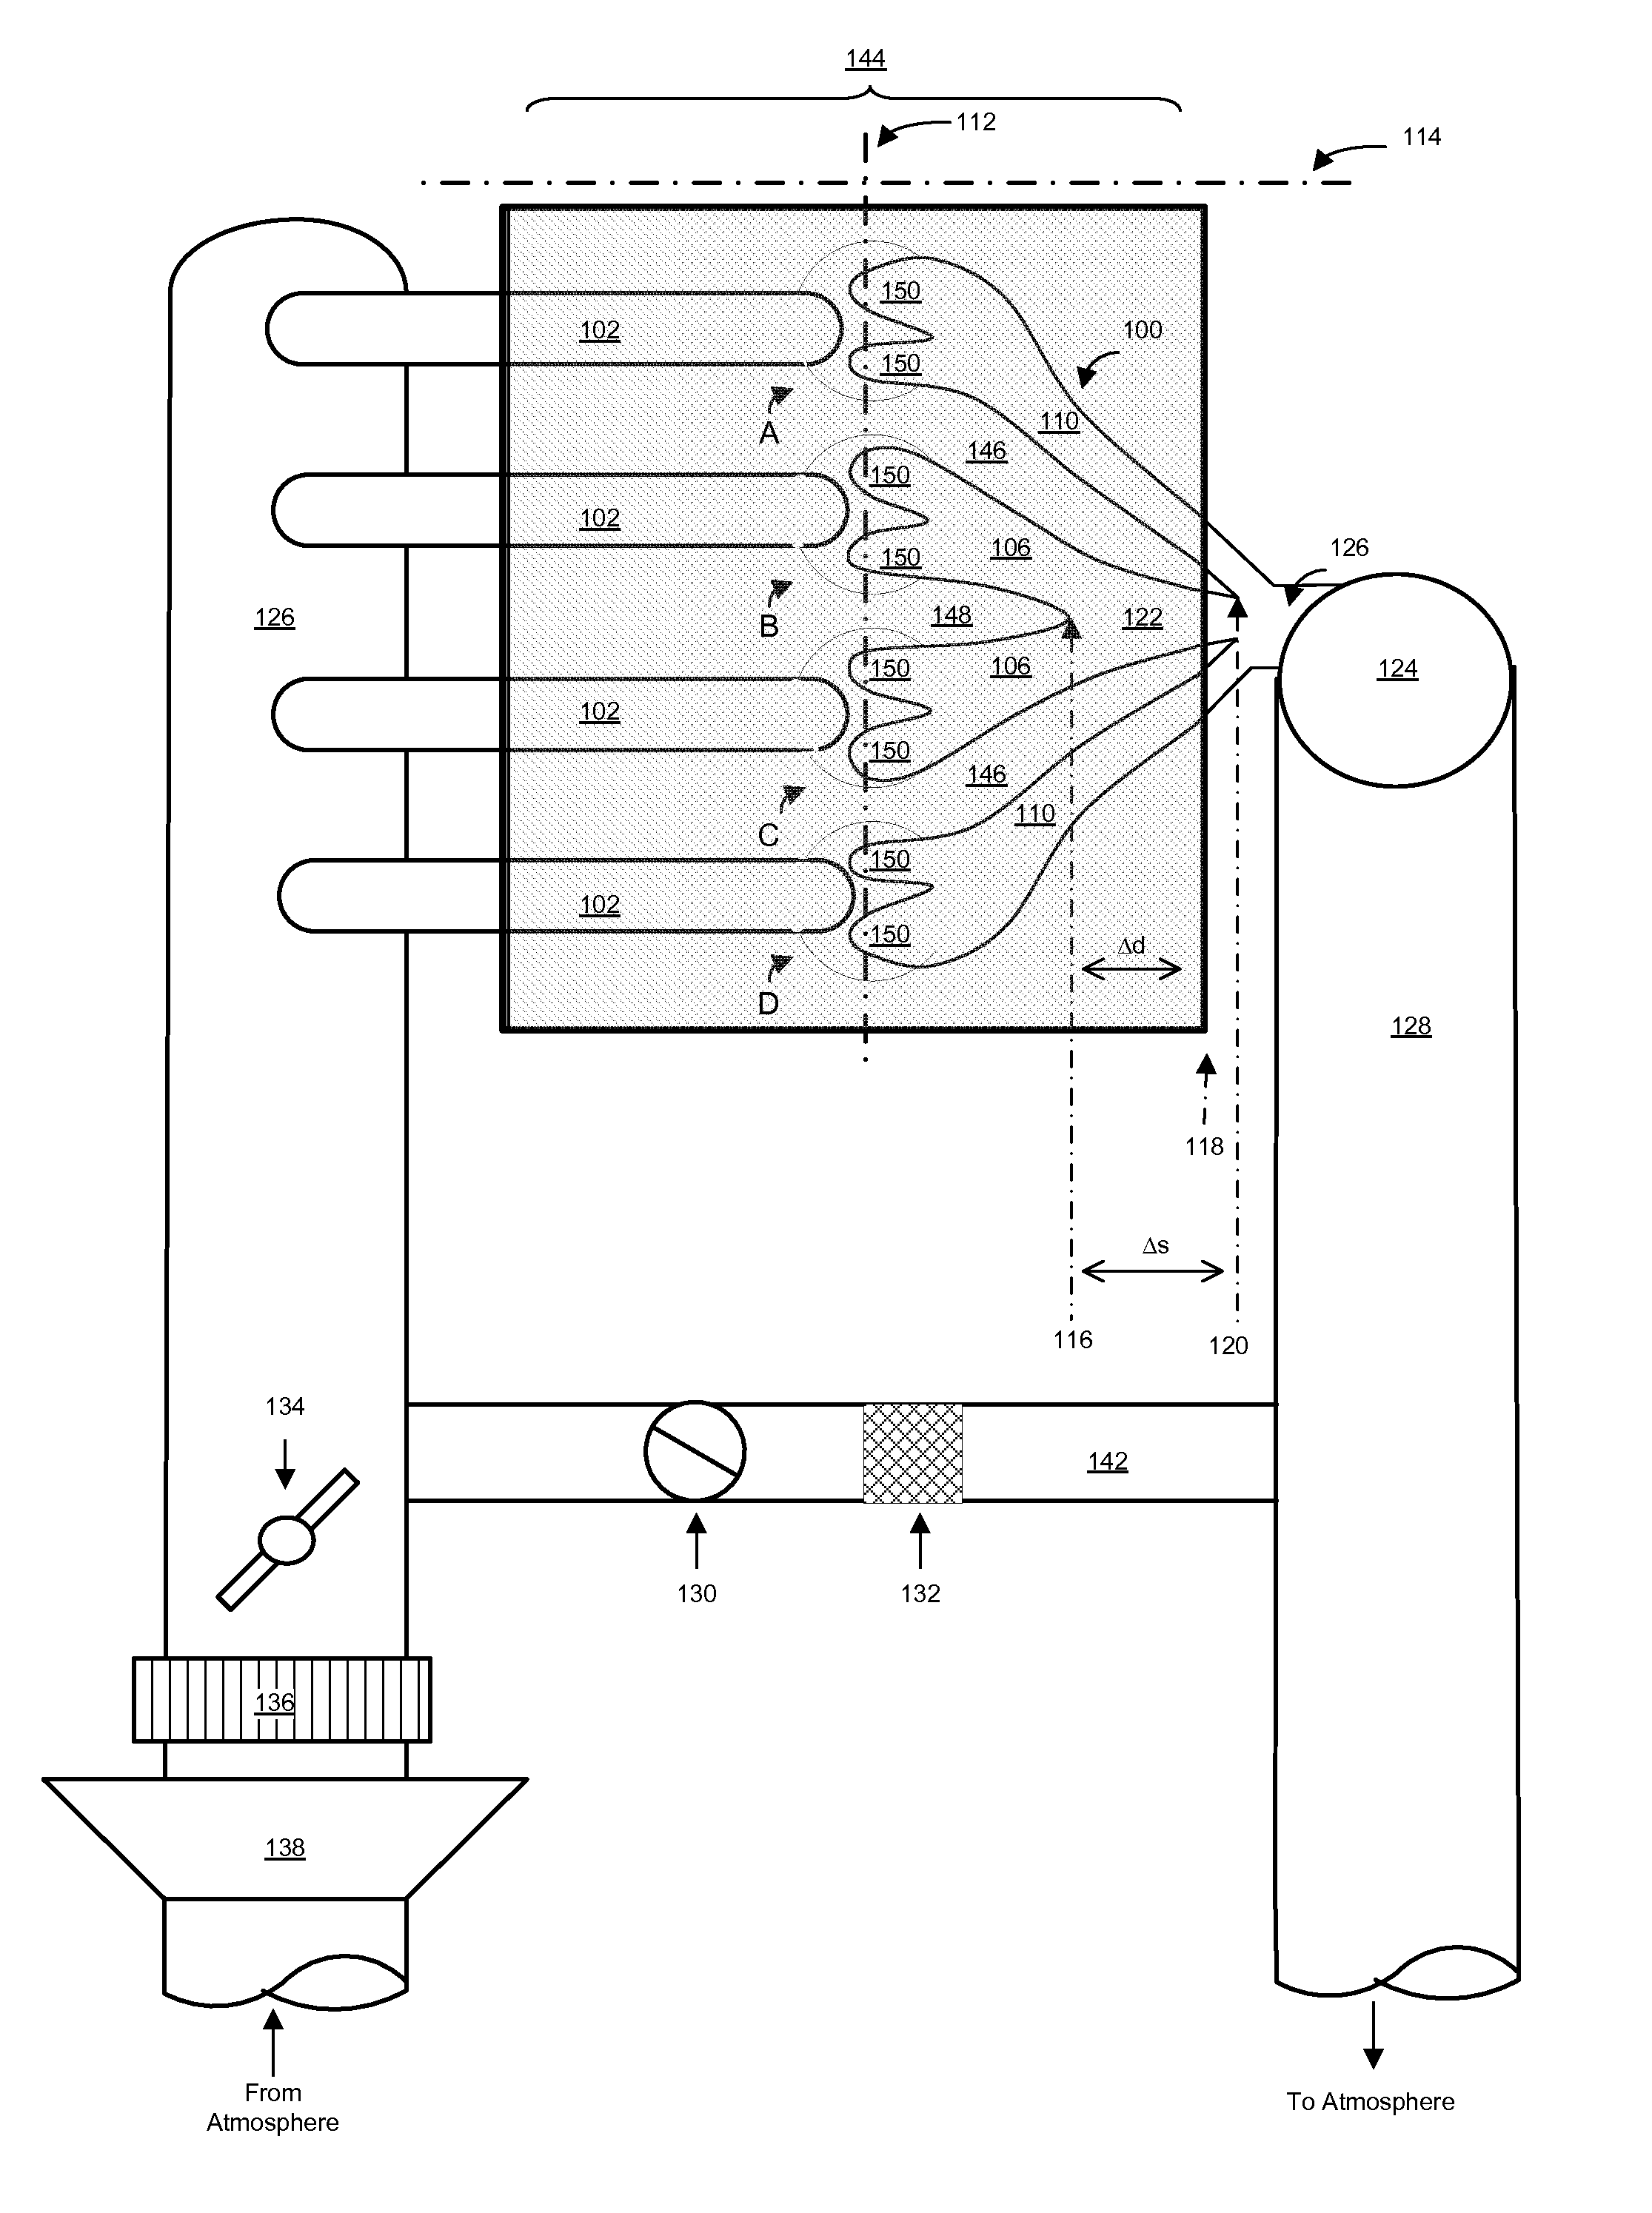 Multi-cylinder internal combustion engine and method for operating such a multi-cylinder internal combustion engine